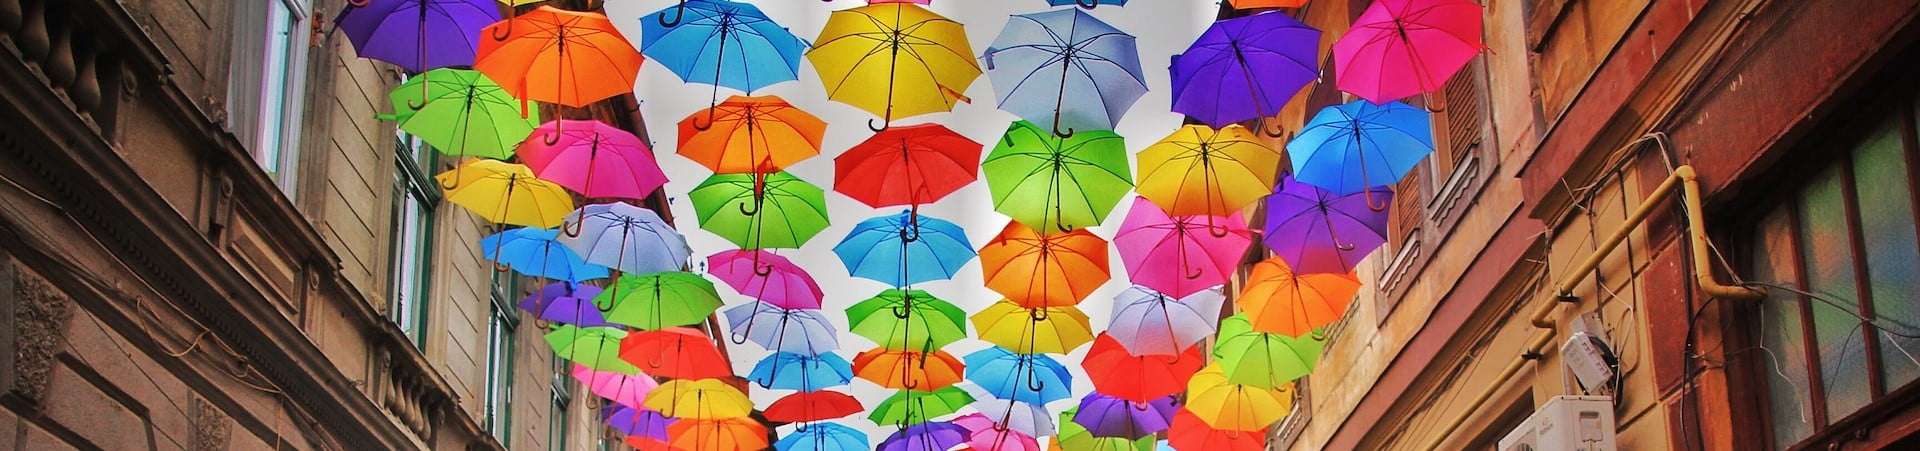 Rows of colourful umbrellas demonstrating culture